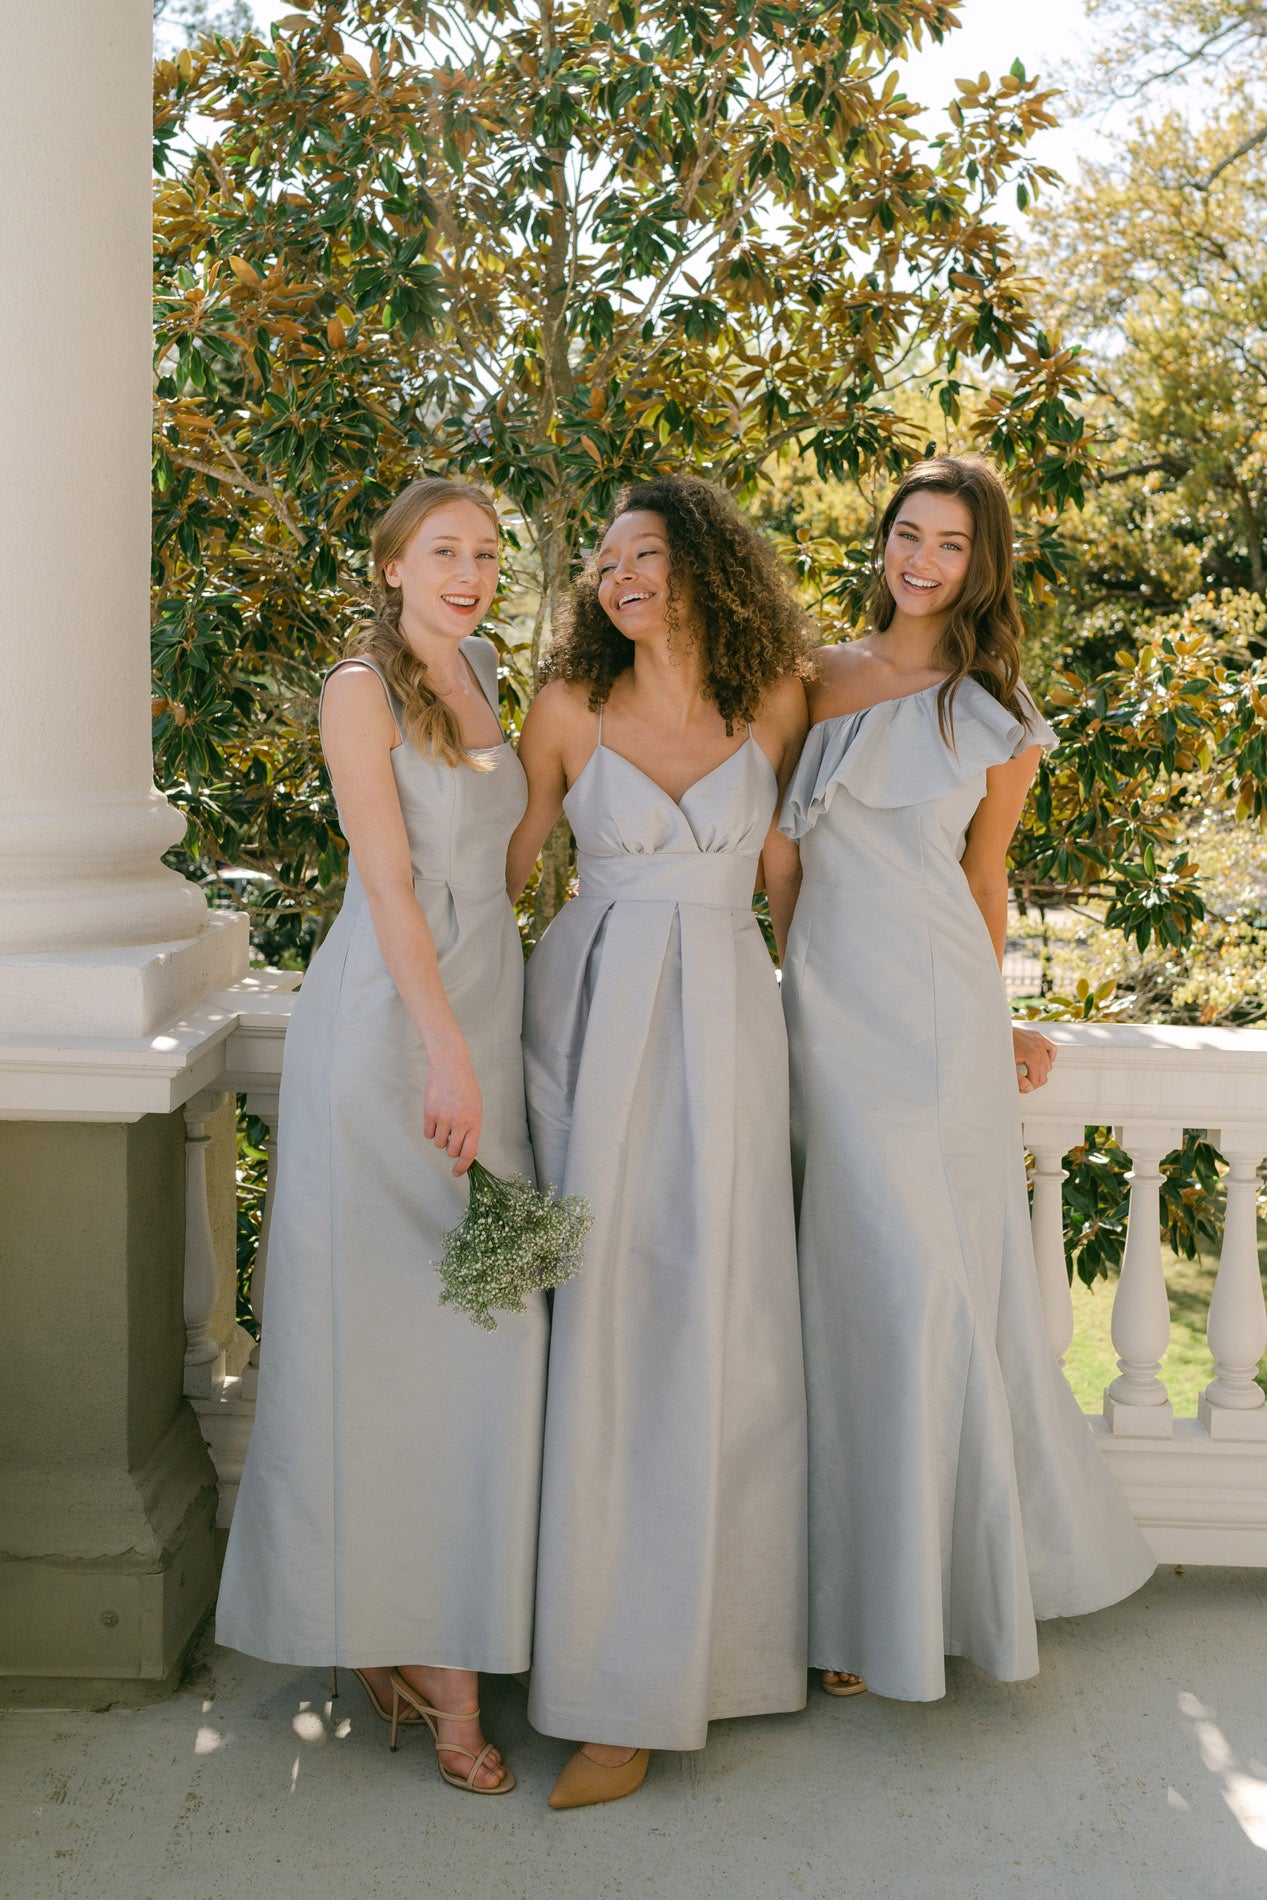 How to find Bridesmaid Dresses that Look Good on Everyone | David's Bridal  Blog